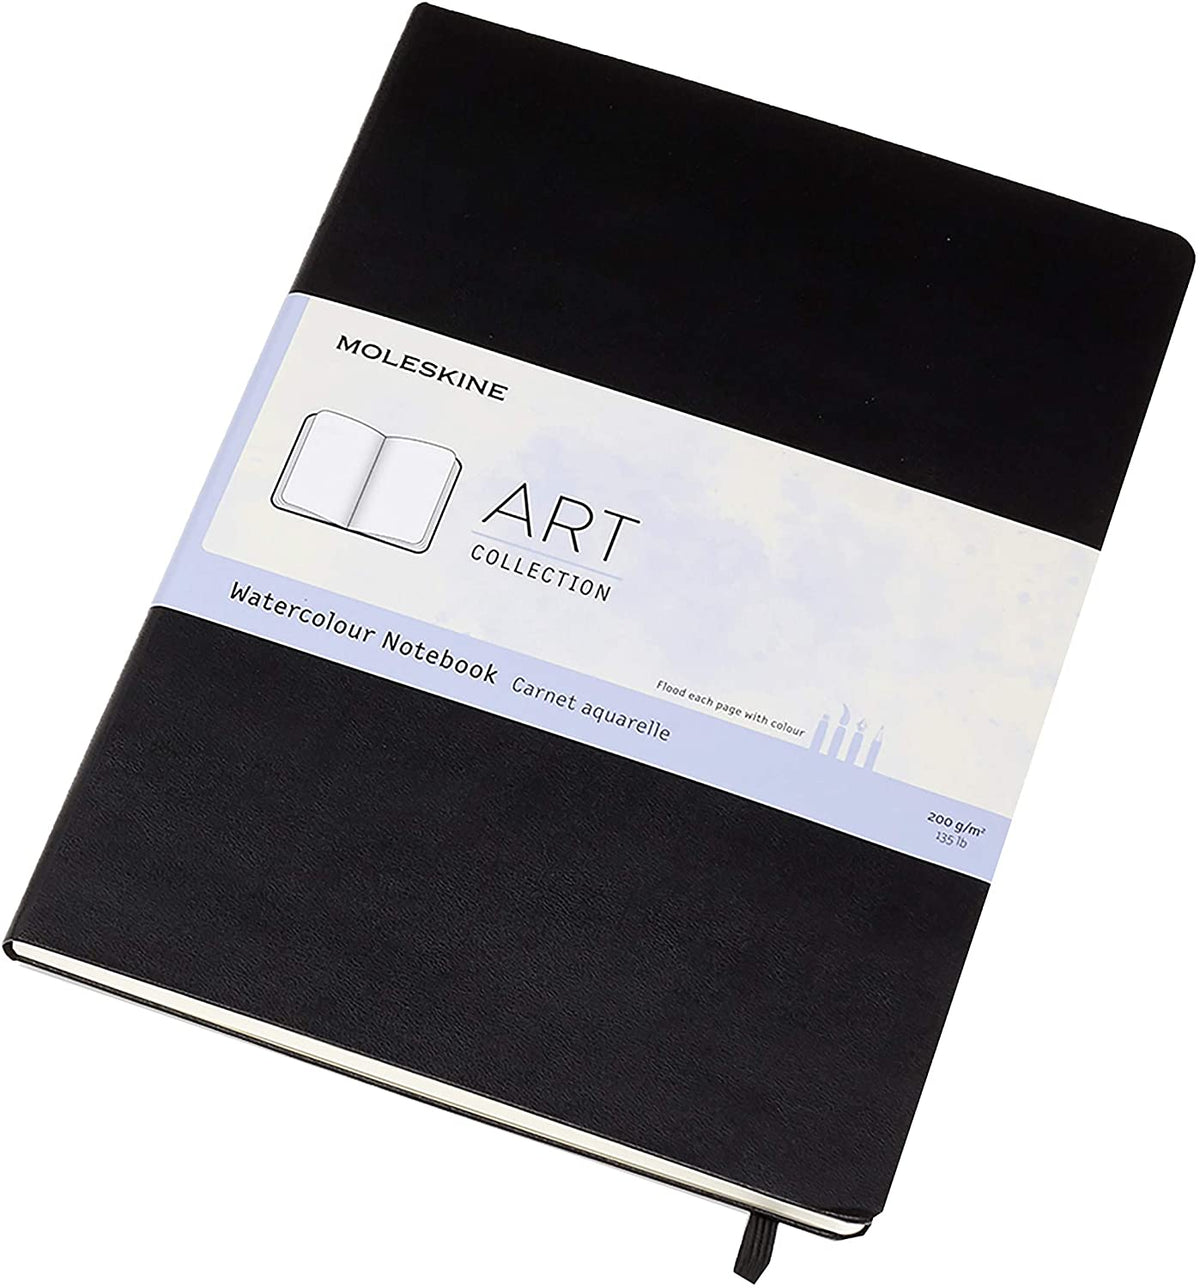 MOLESKINE Classic Watercolour Notebook - Paper Suitable for Watercolour Pencils and Paints - Hard Cover and Elastic Closure - A4 Size - Black